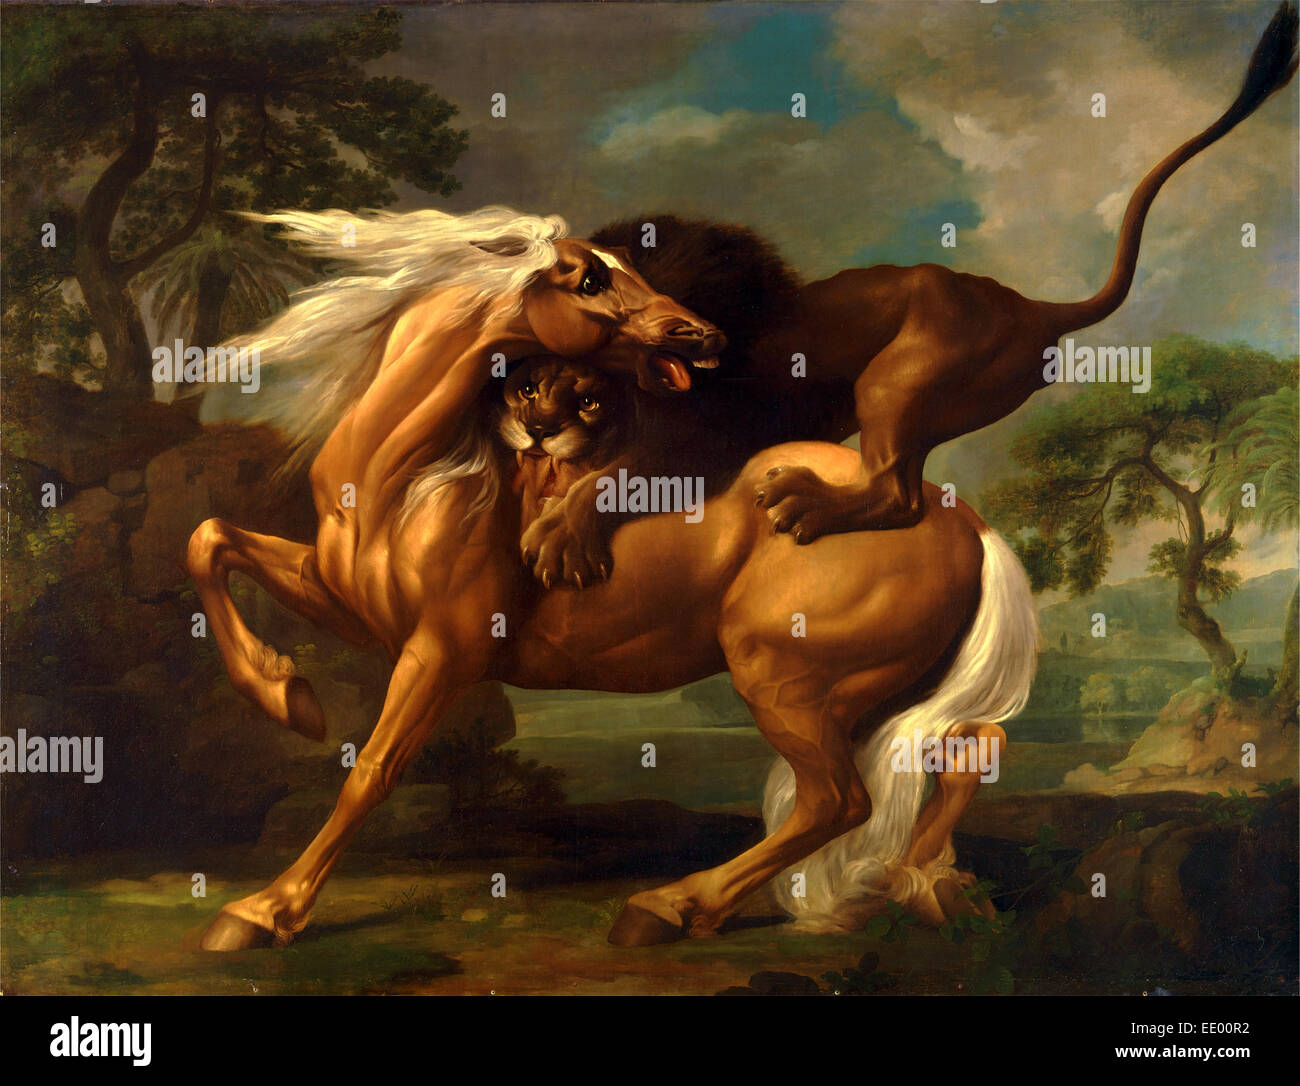 A Lion Attacking a Horse Horse Attacked by a Lion Lion devouring a horse Lion Attacking a Horse, George Stubbs, 1724-1806 Stock Photo